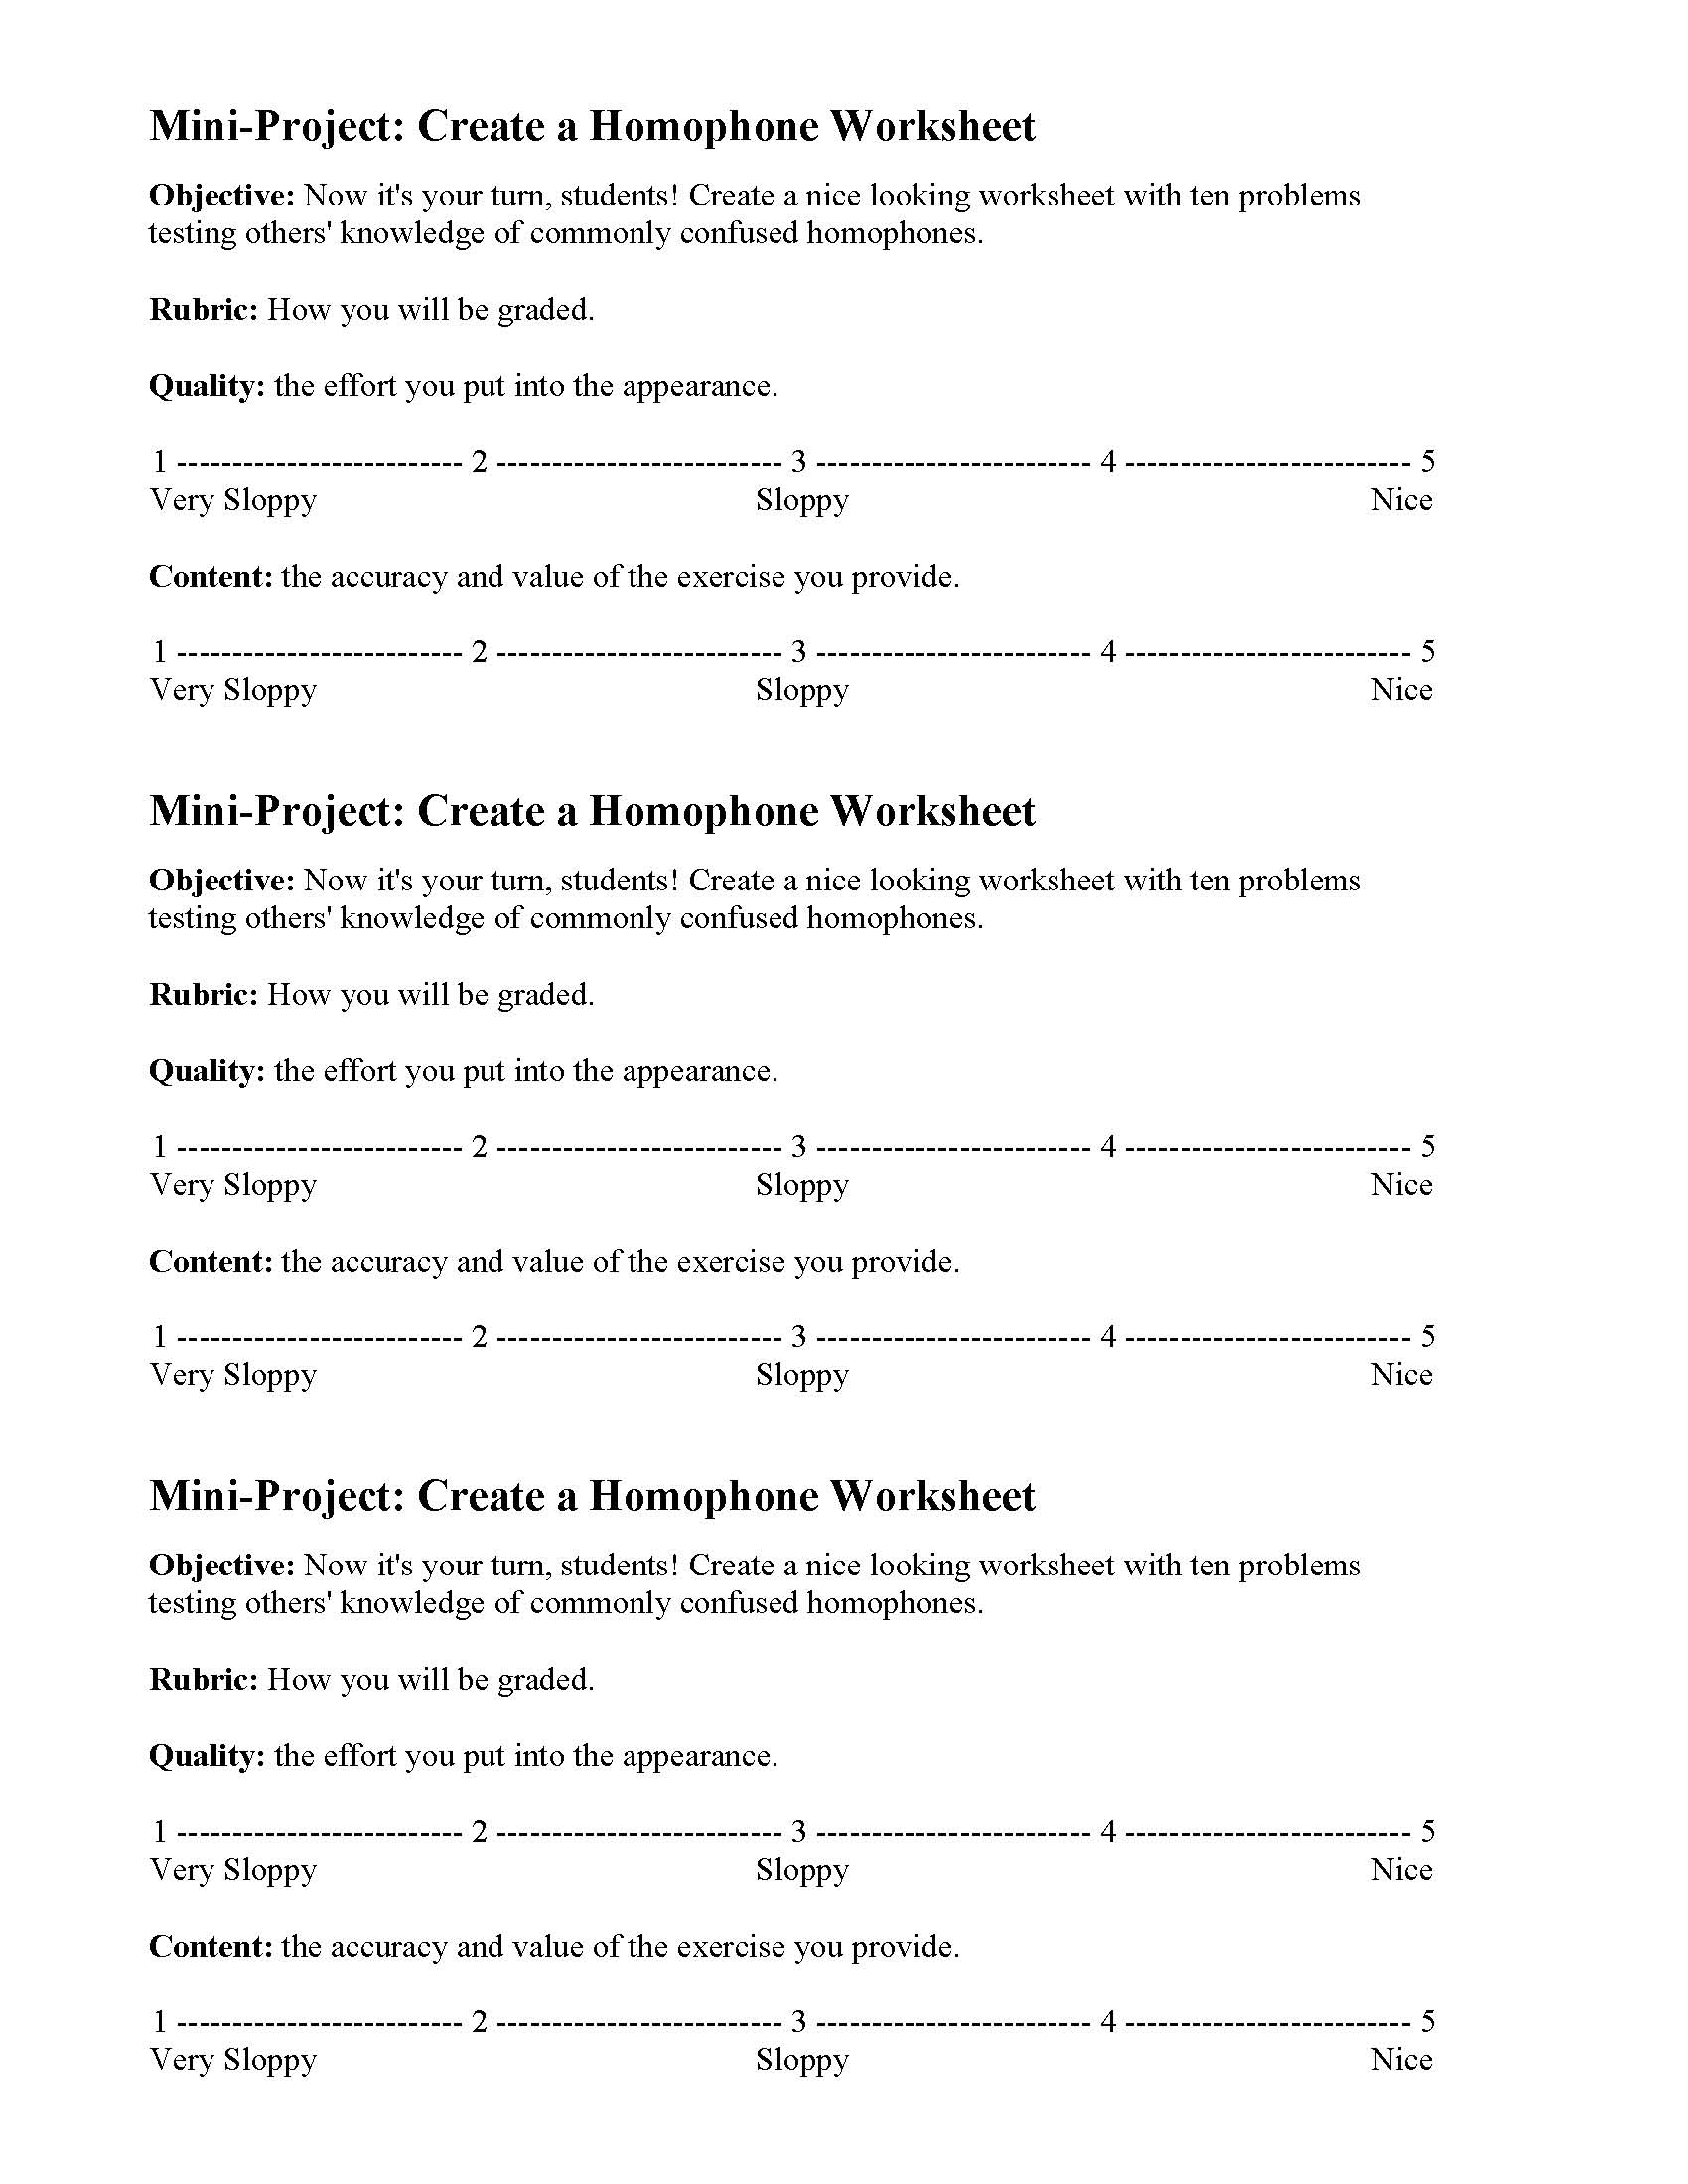 This is a preview image of Make a Homophone Worksheet Project. Click on it to enlarge it or view the source file.